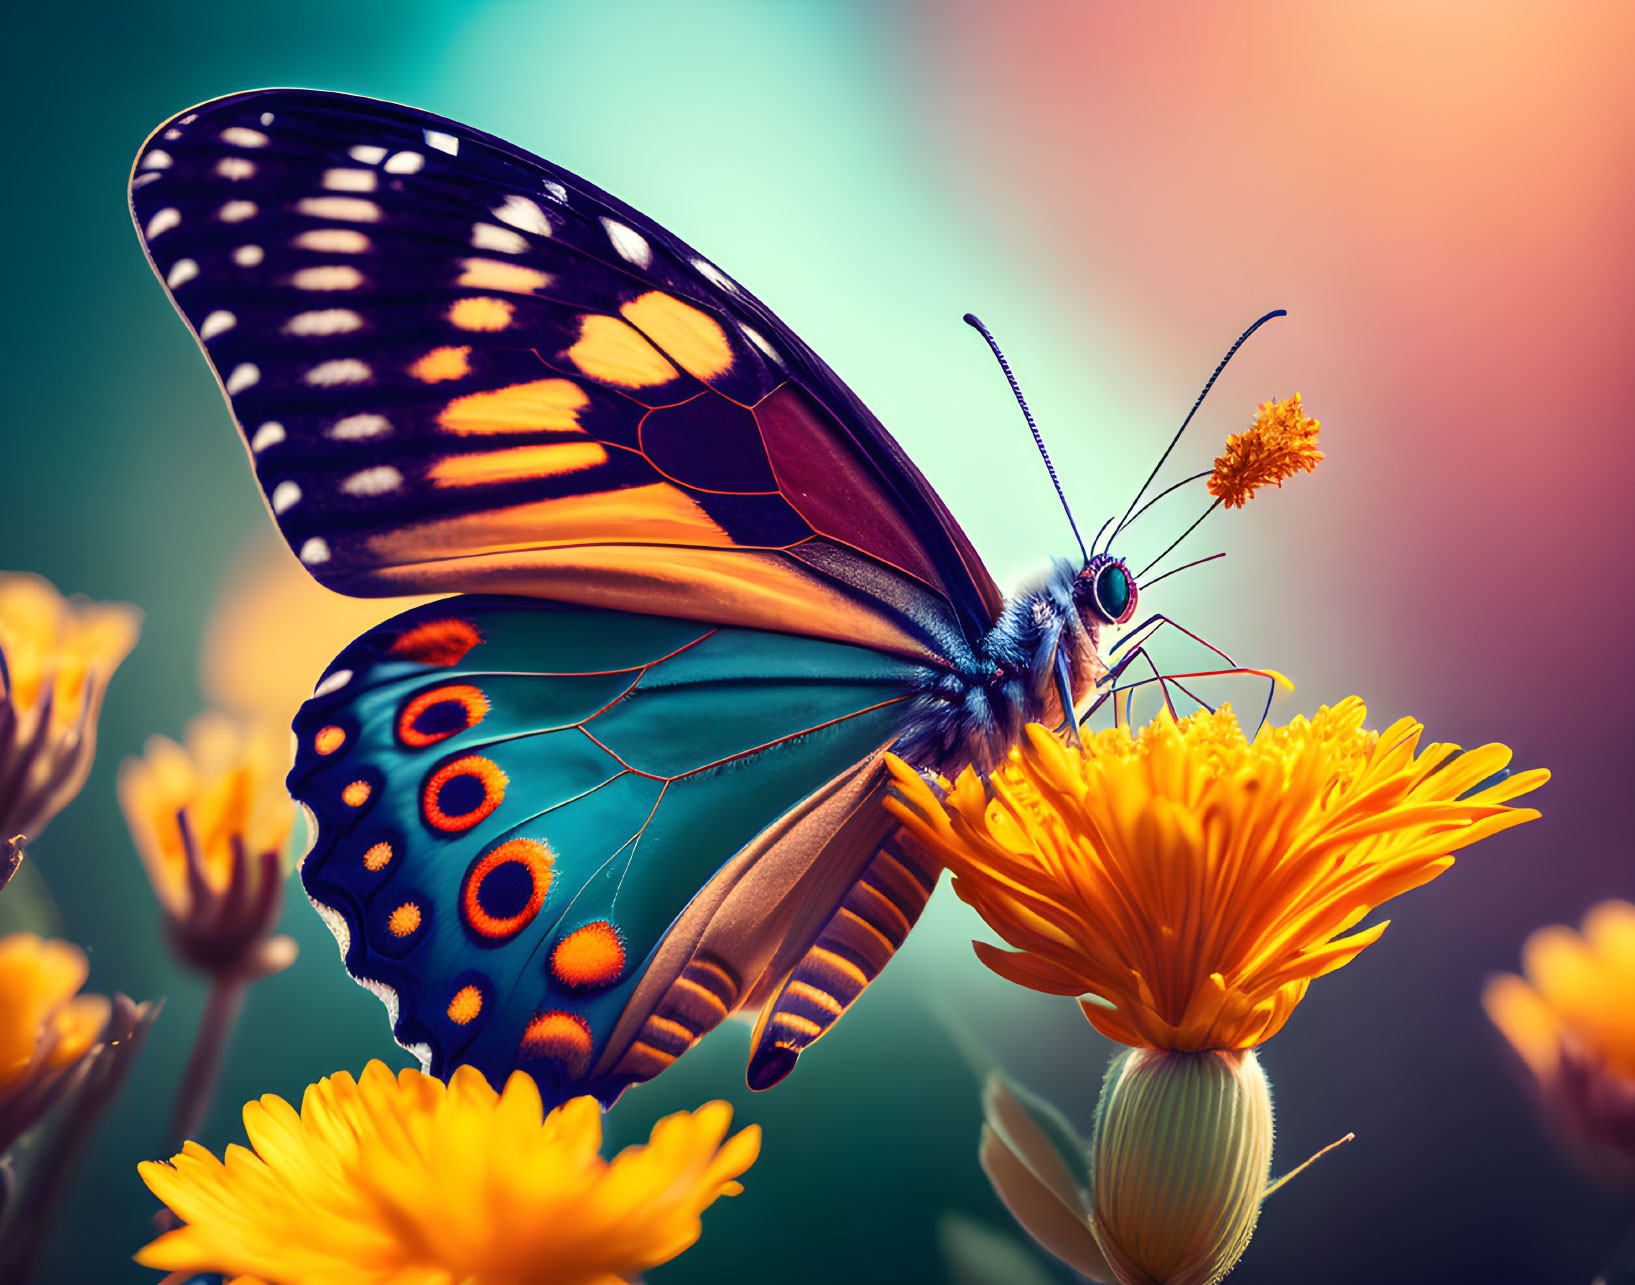 Colorful Butterfly with Orange, Black, and Blue Spots on Yellow Flowers